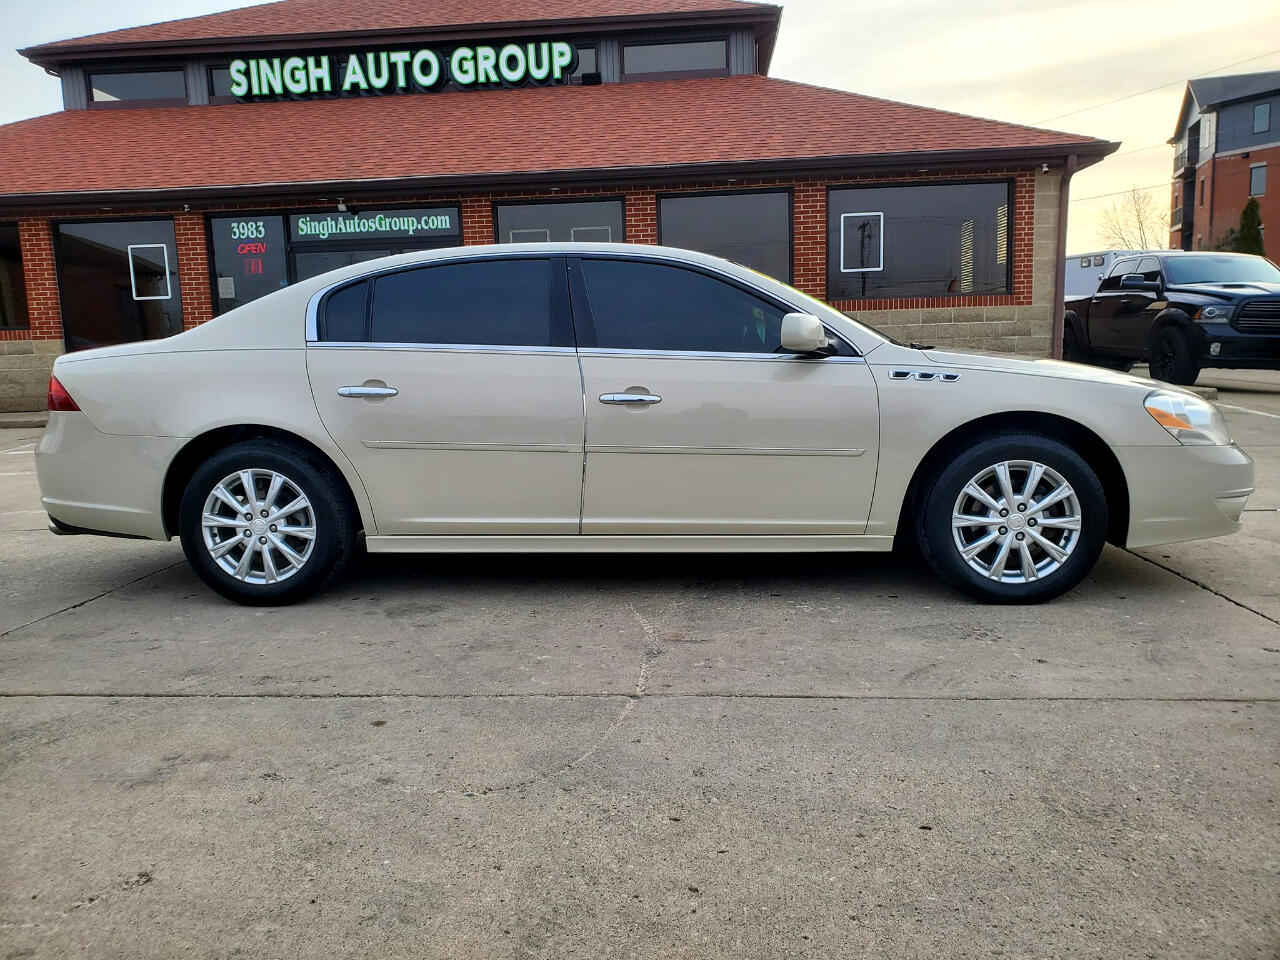 Used 2010 Buick Lucerne CX for Sale in Lafayette IN 47905 Singh Auto Group